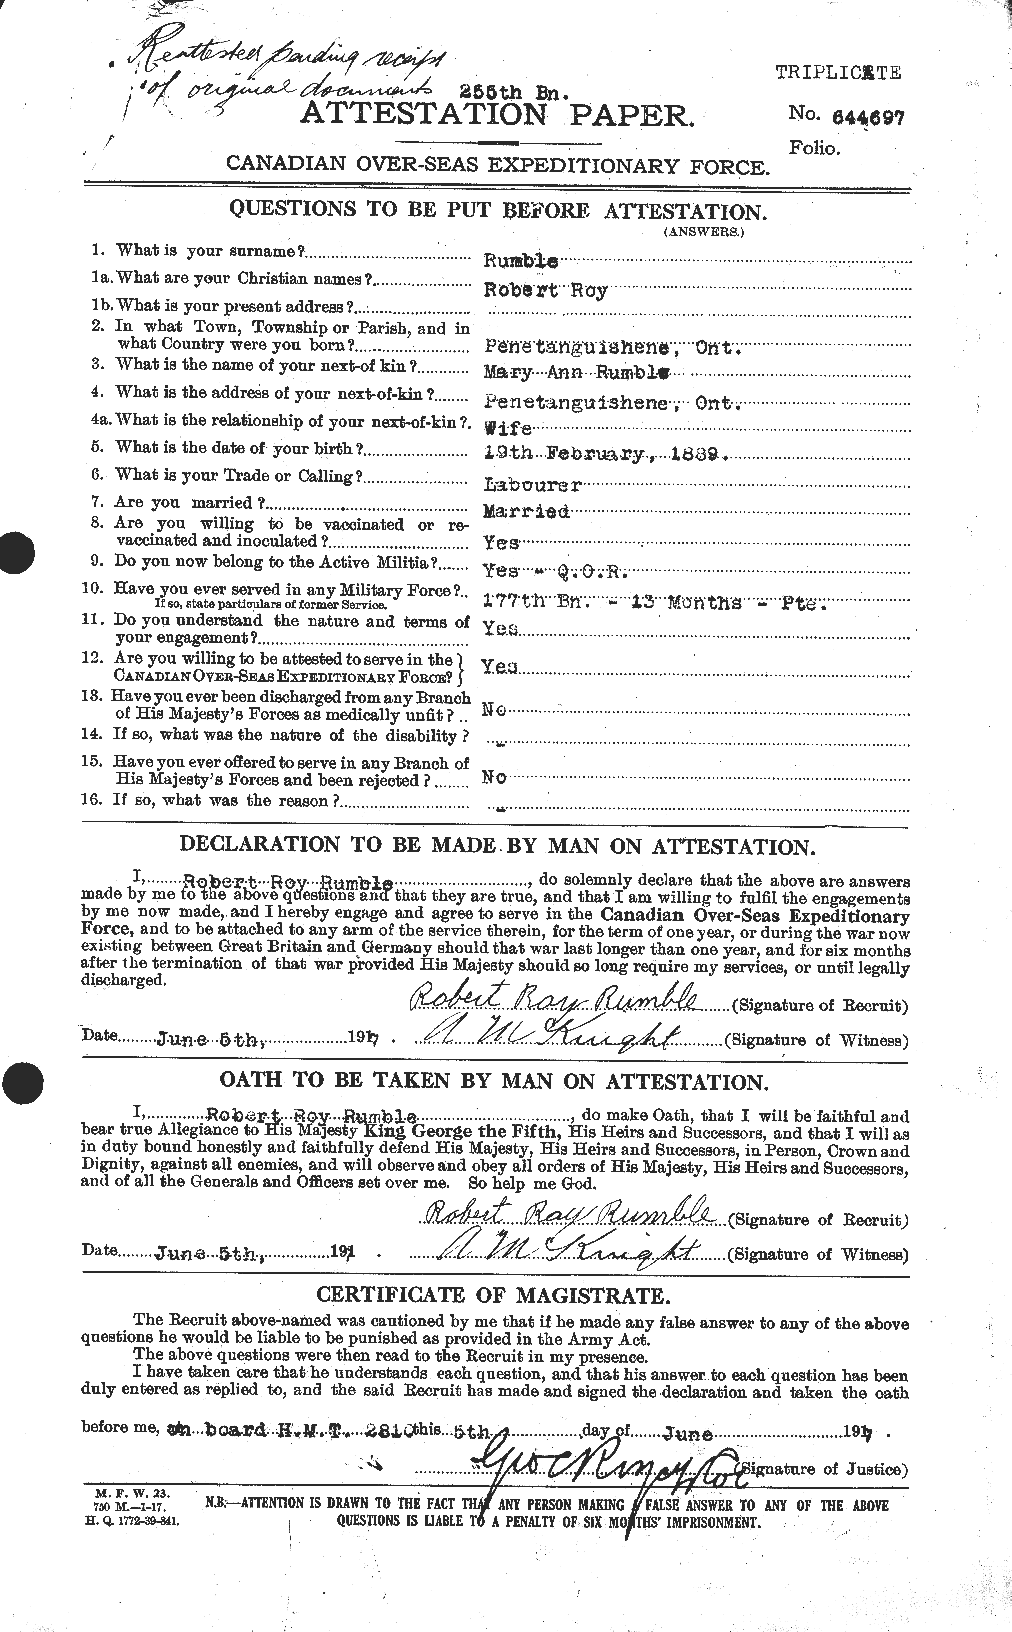 Personnel Records of the First World War - CEF 617385a